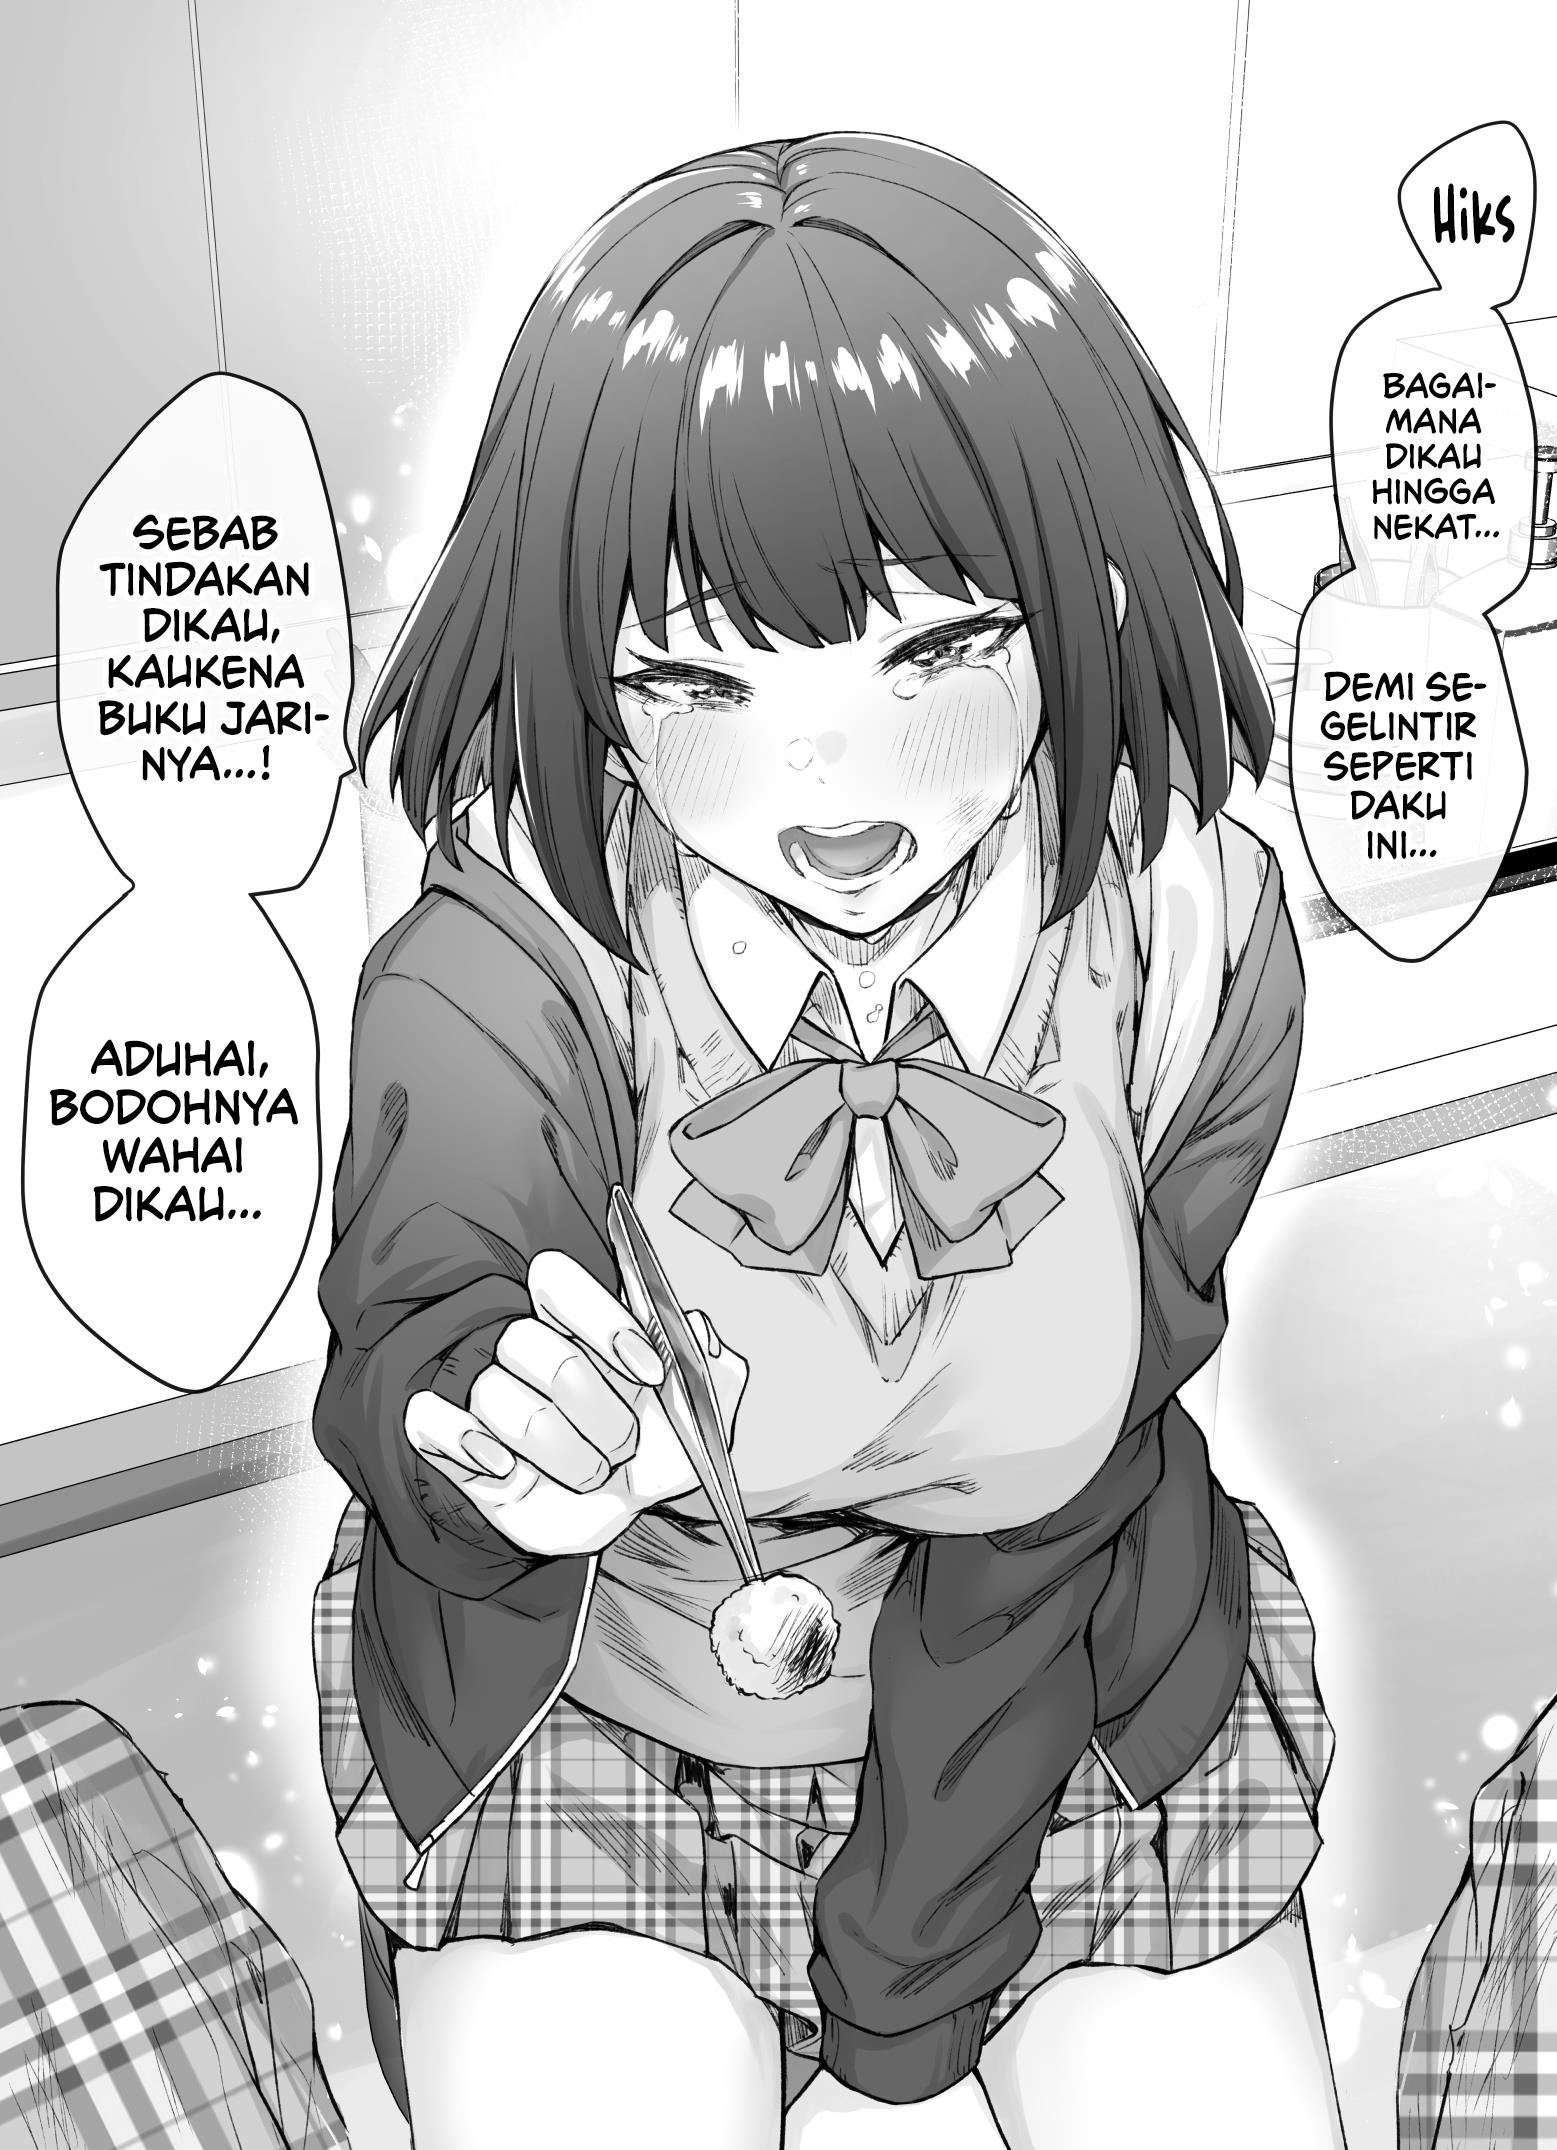 The Tsuntsuntsuntsuntsuntsun tsuntsuntsuntsuntsundere Girl Getting Less and Less Tsun Day by Day Chapter 11.1